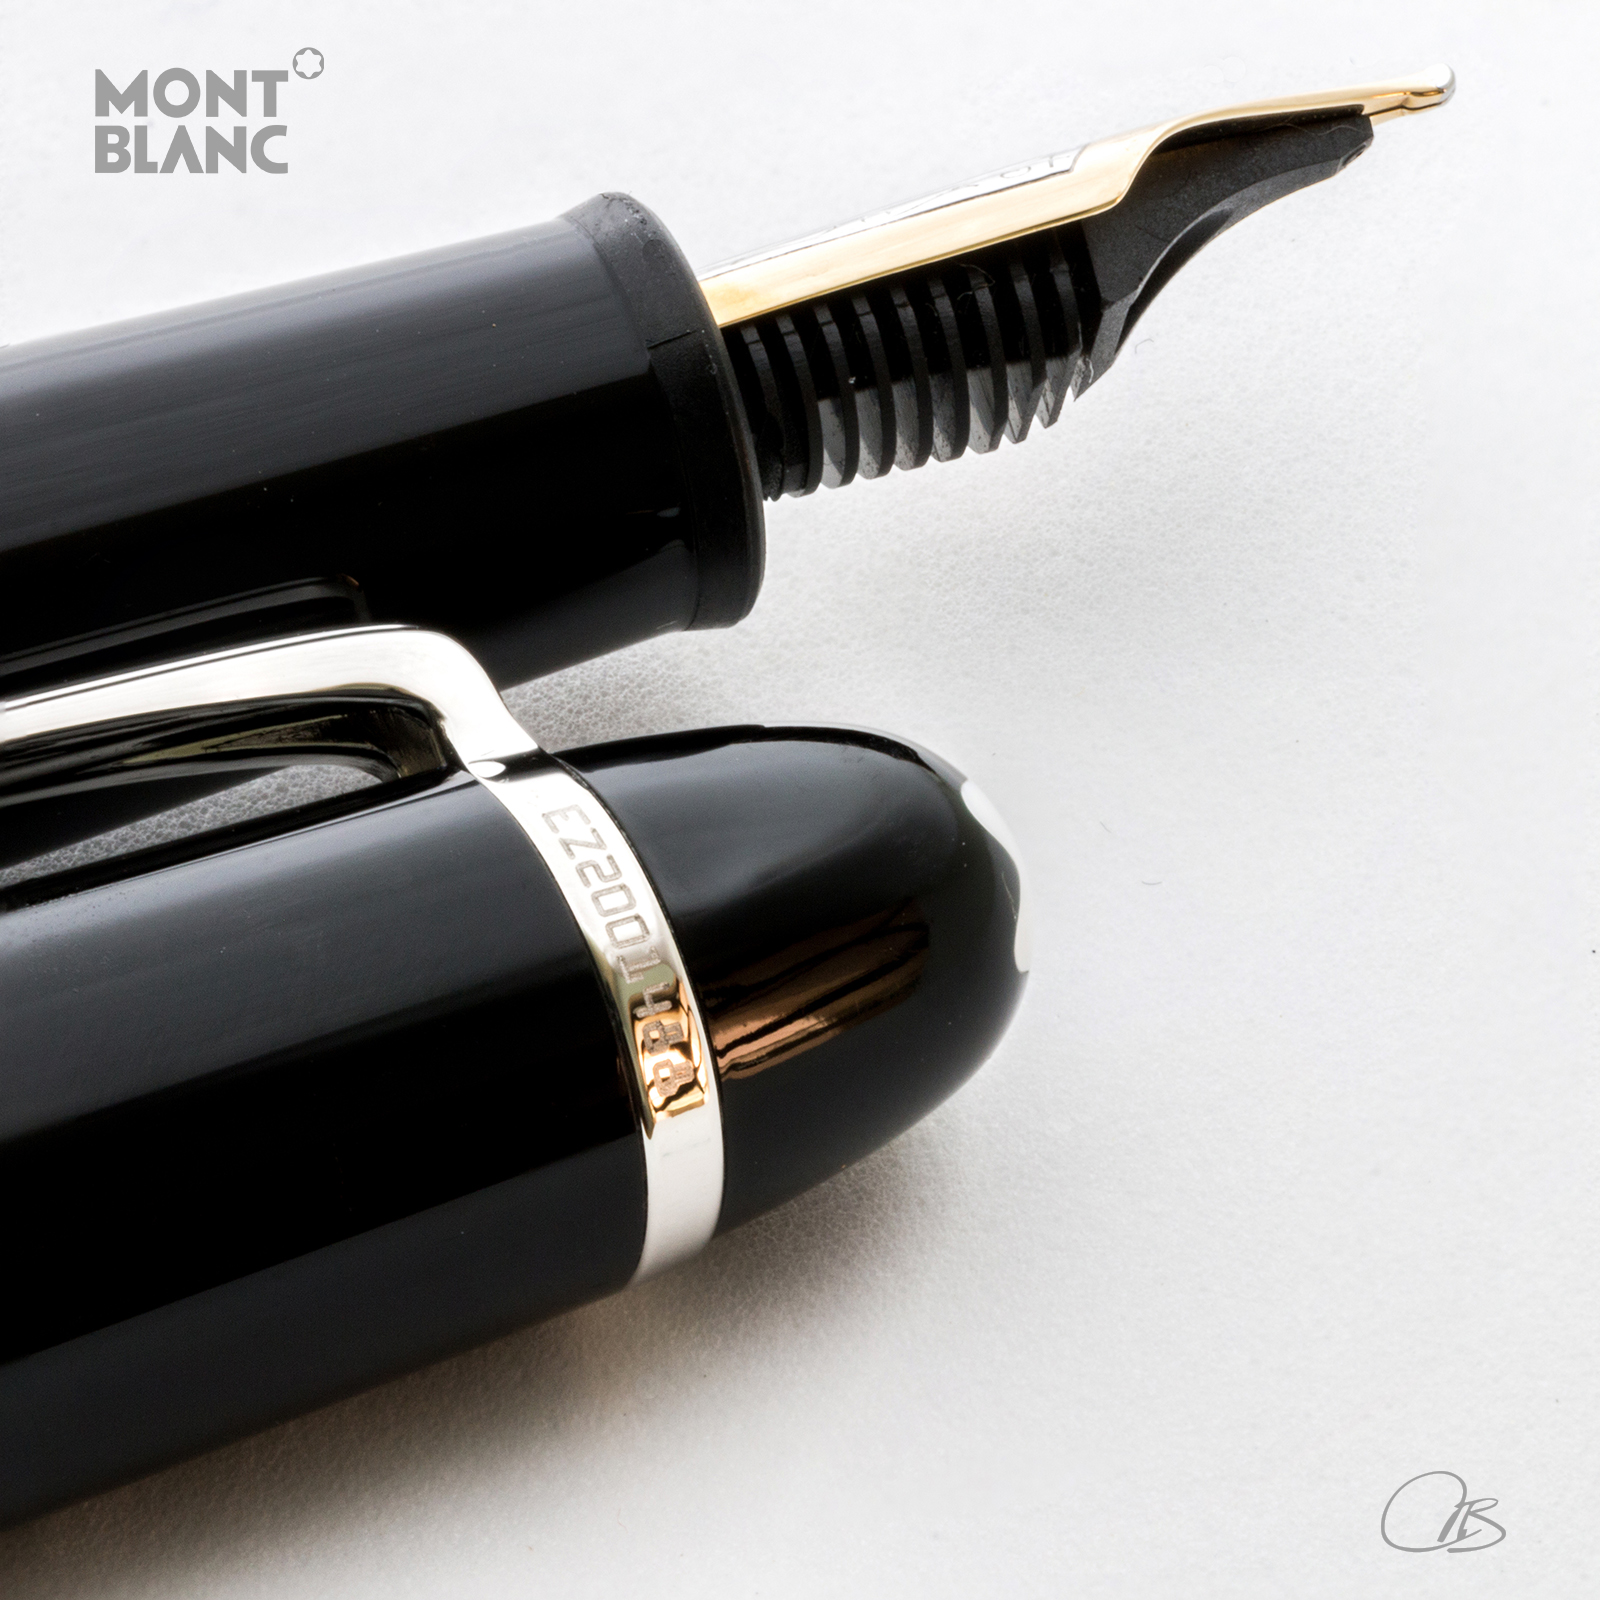 Serial numbers and PIX on the Montblanc